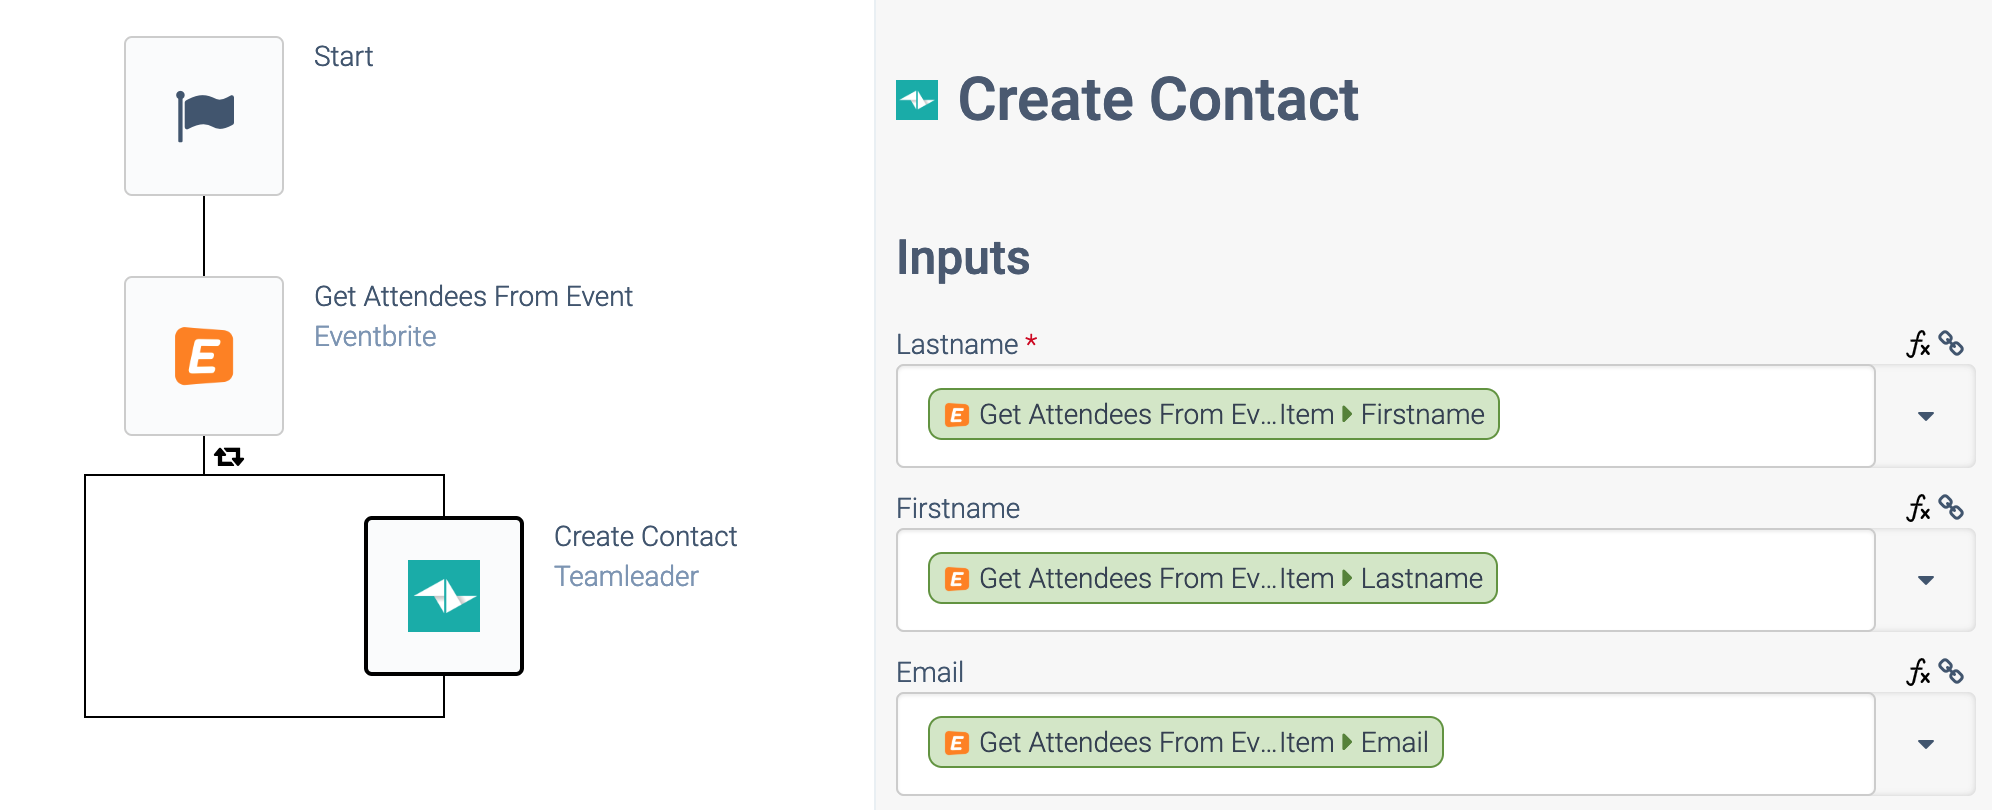 an automation consisting of a Start block and a Get Attendees From Event block containing a Create Contact block in its loop. The Create Contact block is selected. It fills in its Firstname, Lastname, and Email fields with data from the Get Attendees From Event block.